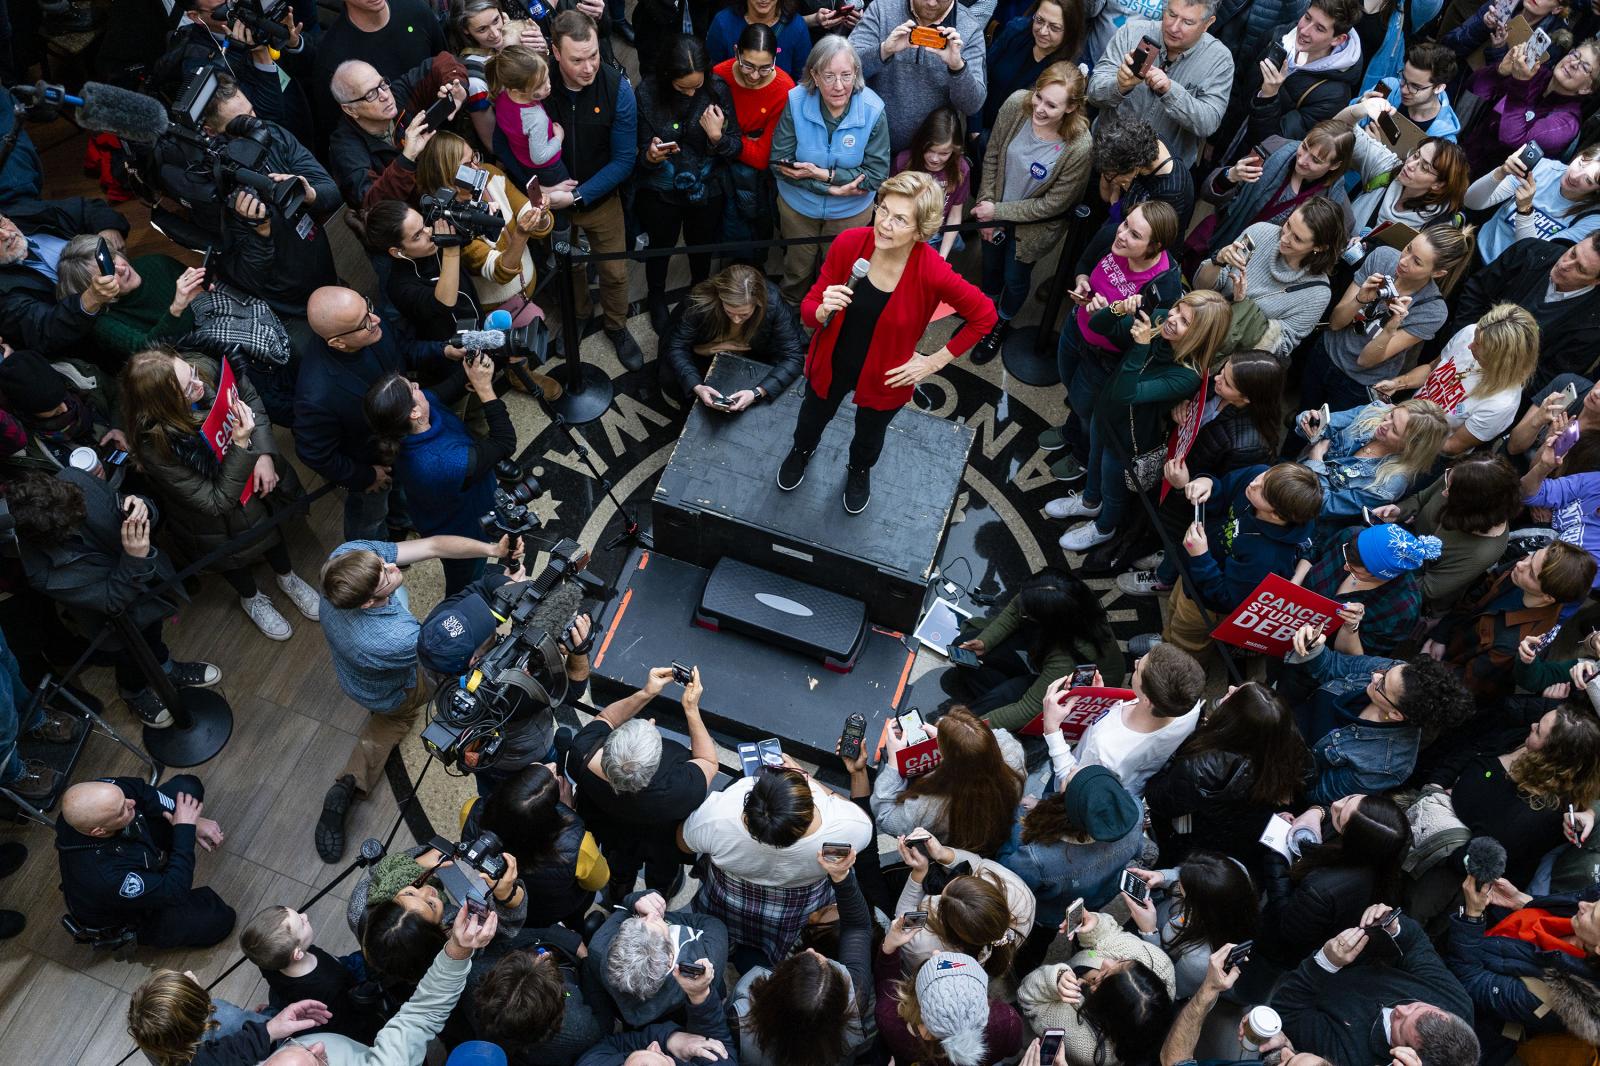 Image from Politics - Elizabeth Warren talks to supporters at a campaign event...